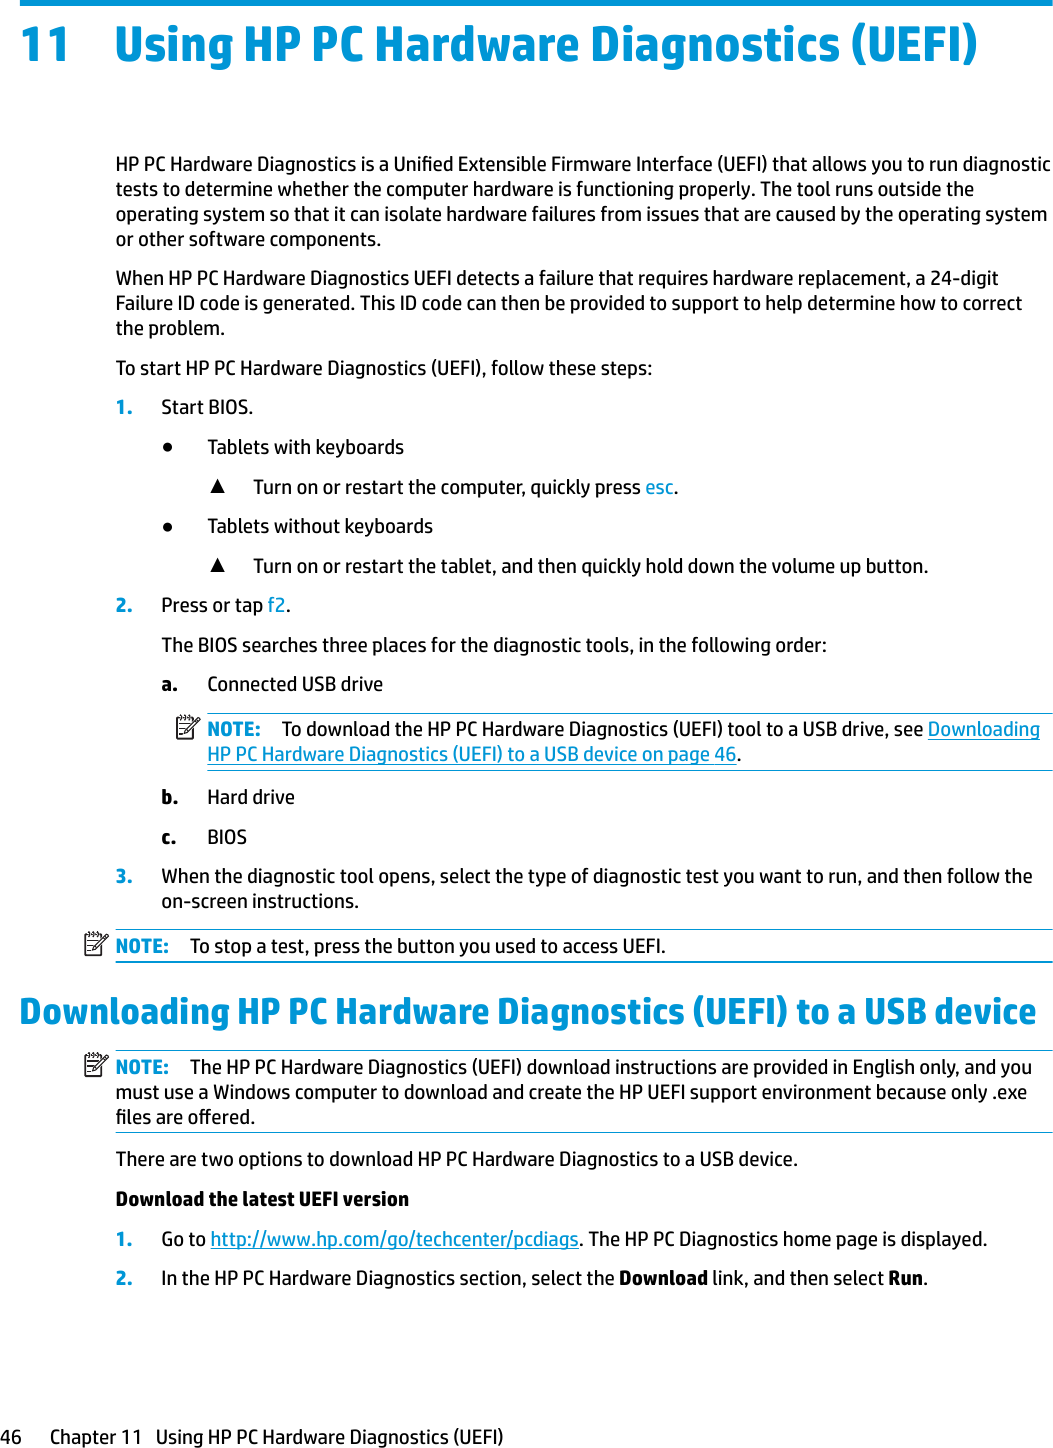 11 Using HP PC Hardware Diagnostics (UEFI)HP PC Hardware Diagnostics is a Unied Extensible Firmware Interface (UEFI) that allows you to run diagnostic tests to determine whether the computer hardware is functioning properly. The tool runs outside the operating system so that it can isolate hardware failures from issues that are caused by the operating system or other software components.When HP PC Hardware Diagnostics UEFI detects a failure that requires hardware replacement, a 24-digit Failure ID code is generated. This ID code can then be provided to support to help determine how to correct the problem.To start HP PC Hardware Diagnostics (UEFI), follow these steps:1. Start BIOS.●Tablets with keyboards▲Turn on or restart the computer, quickly press esc.●Tablets without keyboards▲Turn on or restart the tablet, and then quickly hold down the volume up button.2. Press or tap f2.The BIOS searches three places for the diagnostic tools, in the following order:a. Connected USB driveNOTE: To download the HP PC Hardware Diagnostics (UEFI) tool to a USB drive, see Downloading HP PC Hardware Diagnostics (UEFI) to a USB device on page 46.b. Hard drivec. BIOS3. When the diagnostic tool opens, select the type of diagnostic test you want to run, and then follow the on-screen instructions.NOTE: To stop a test, press the button you used to access UEFI.Downloading HP PC Hardware Diagnostics (UEFI) to a USB deviceNOTE: The HP PC Hardware Diagnostics (UEFI) download instructions are provided in English only, and you must use a Windows computer to download and create the HP UEFI support environment because only .exe les are oered.There are two options to download HP PC Hardware Diagnostics to a USB device.Download the latest UEFI version1. Go to http://www.hp.com/go/techcenter/pcdiags. The HP PC Diagnostics home page is displayed.2. In the HP PC Hardware Diagnostics section, select the Download link, and then select Run.46 Chapter 11   Using HP PC Hardware Diagnostics (UEFI)